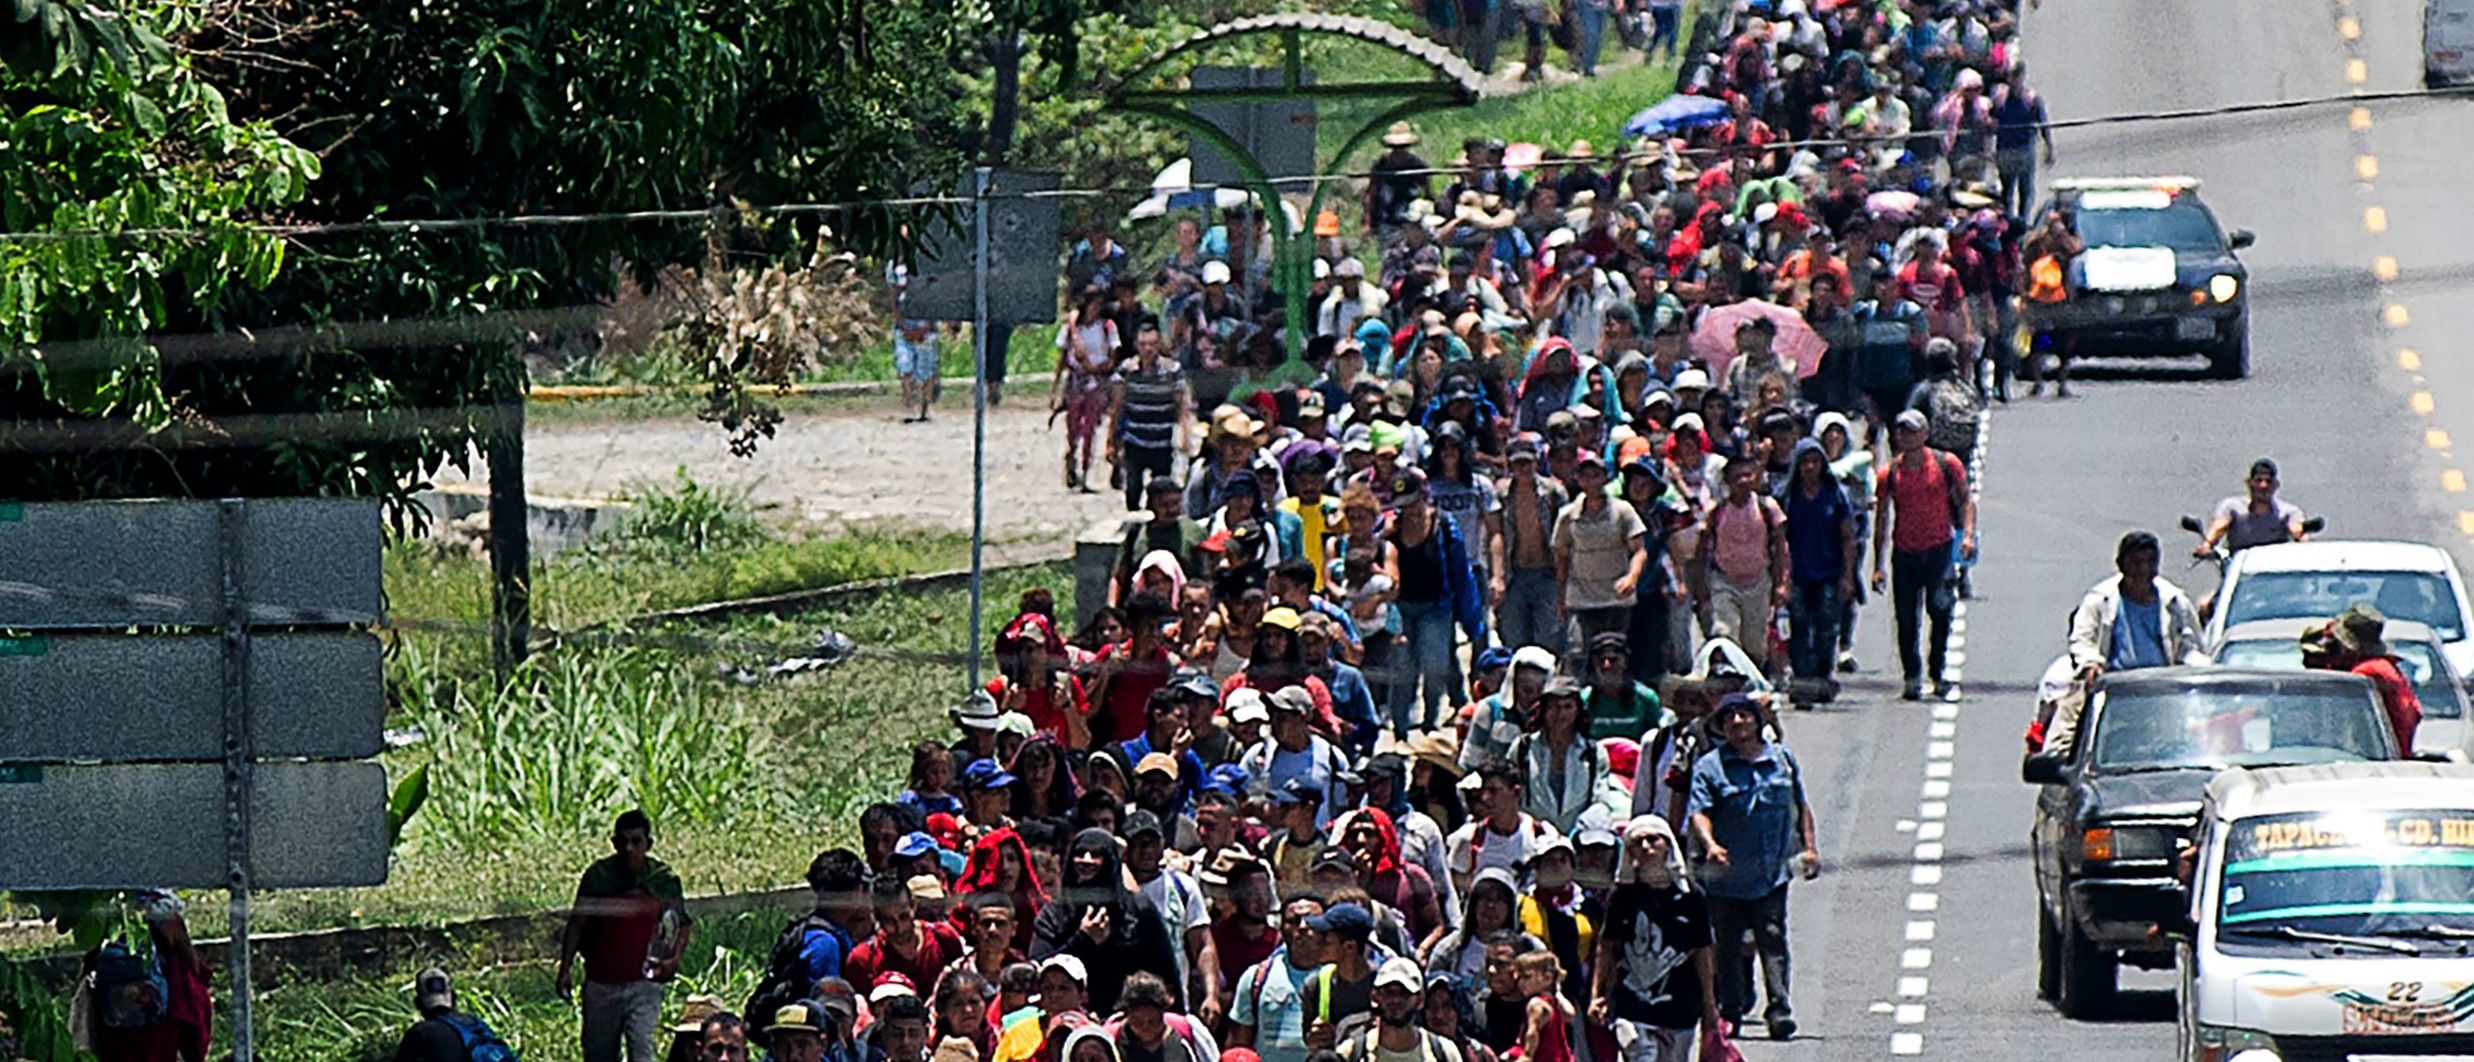 Central American migrants heading to the US walk in caravan along the route between Metapa and Tapachula in Mexico on April 12, 2019. - A group of 350 Central American migrants forced their way into Mexico Friday, authorities said, as a new caravan of around 2,500 people arrived -- news sure to draw the attention of US President Donald Trump. Mexico's National Migration Institute said some members of the caravan had a "hostile attitude" and had attacked local police in the southern town of Metapa de Dominguez after crossing the border from Guatemala. (Photo by Pep COMPANYS / AFP/Getty Images)